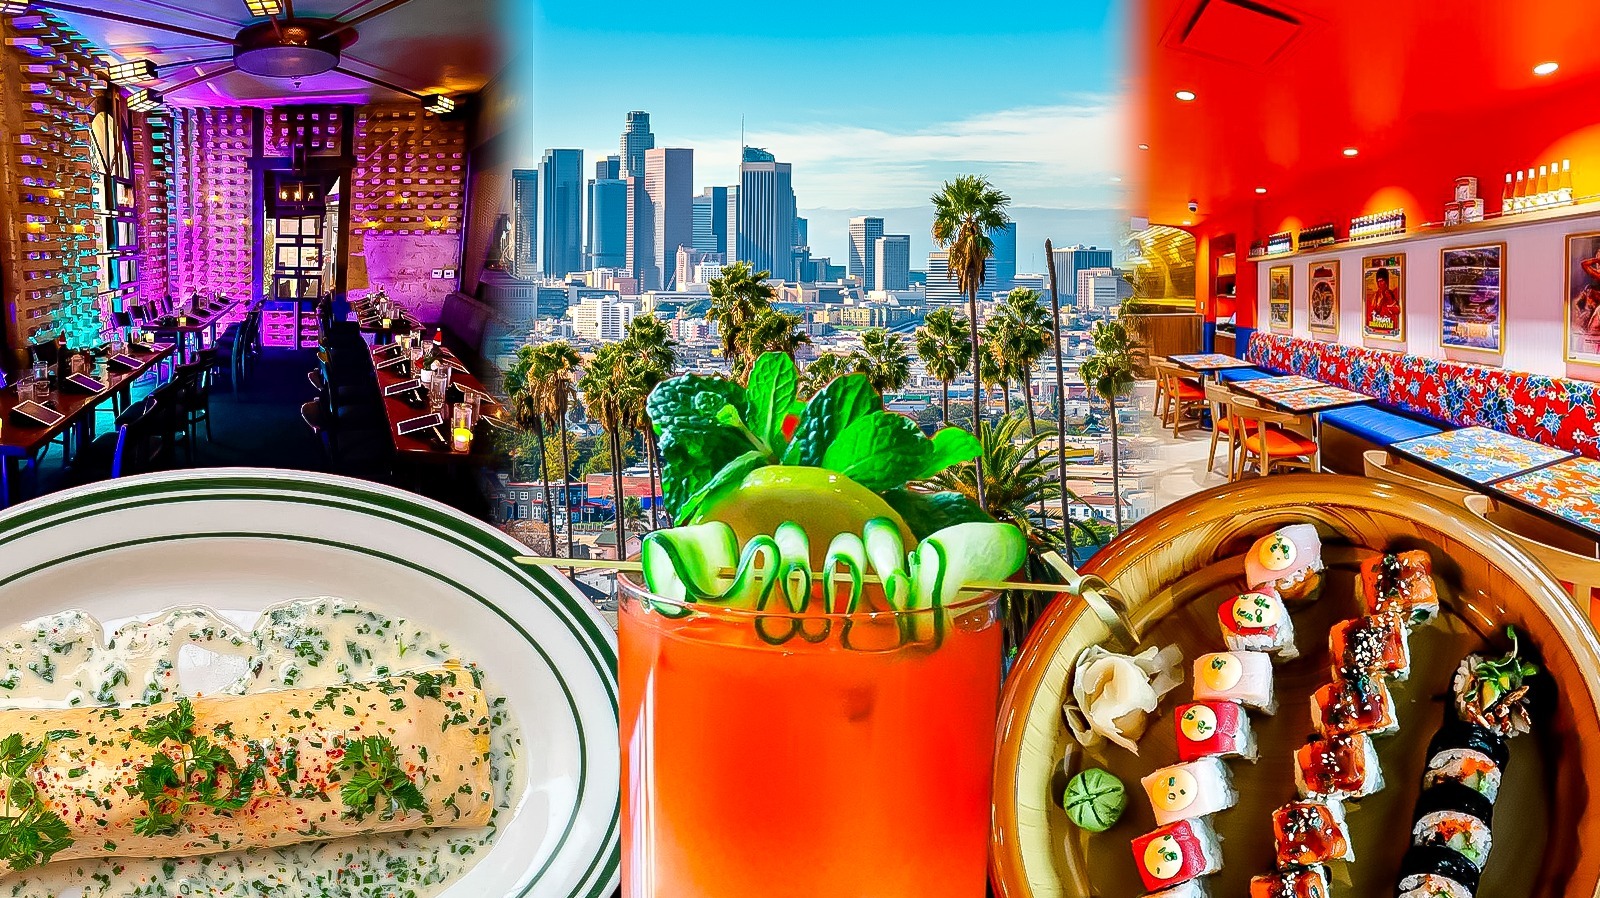 Best of West Hollywood, from restaurants to hotels